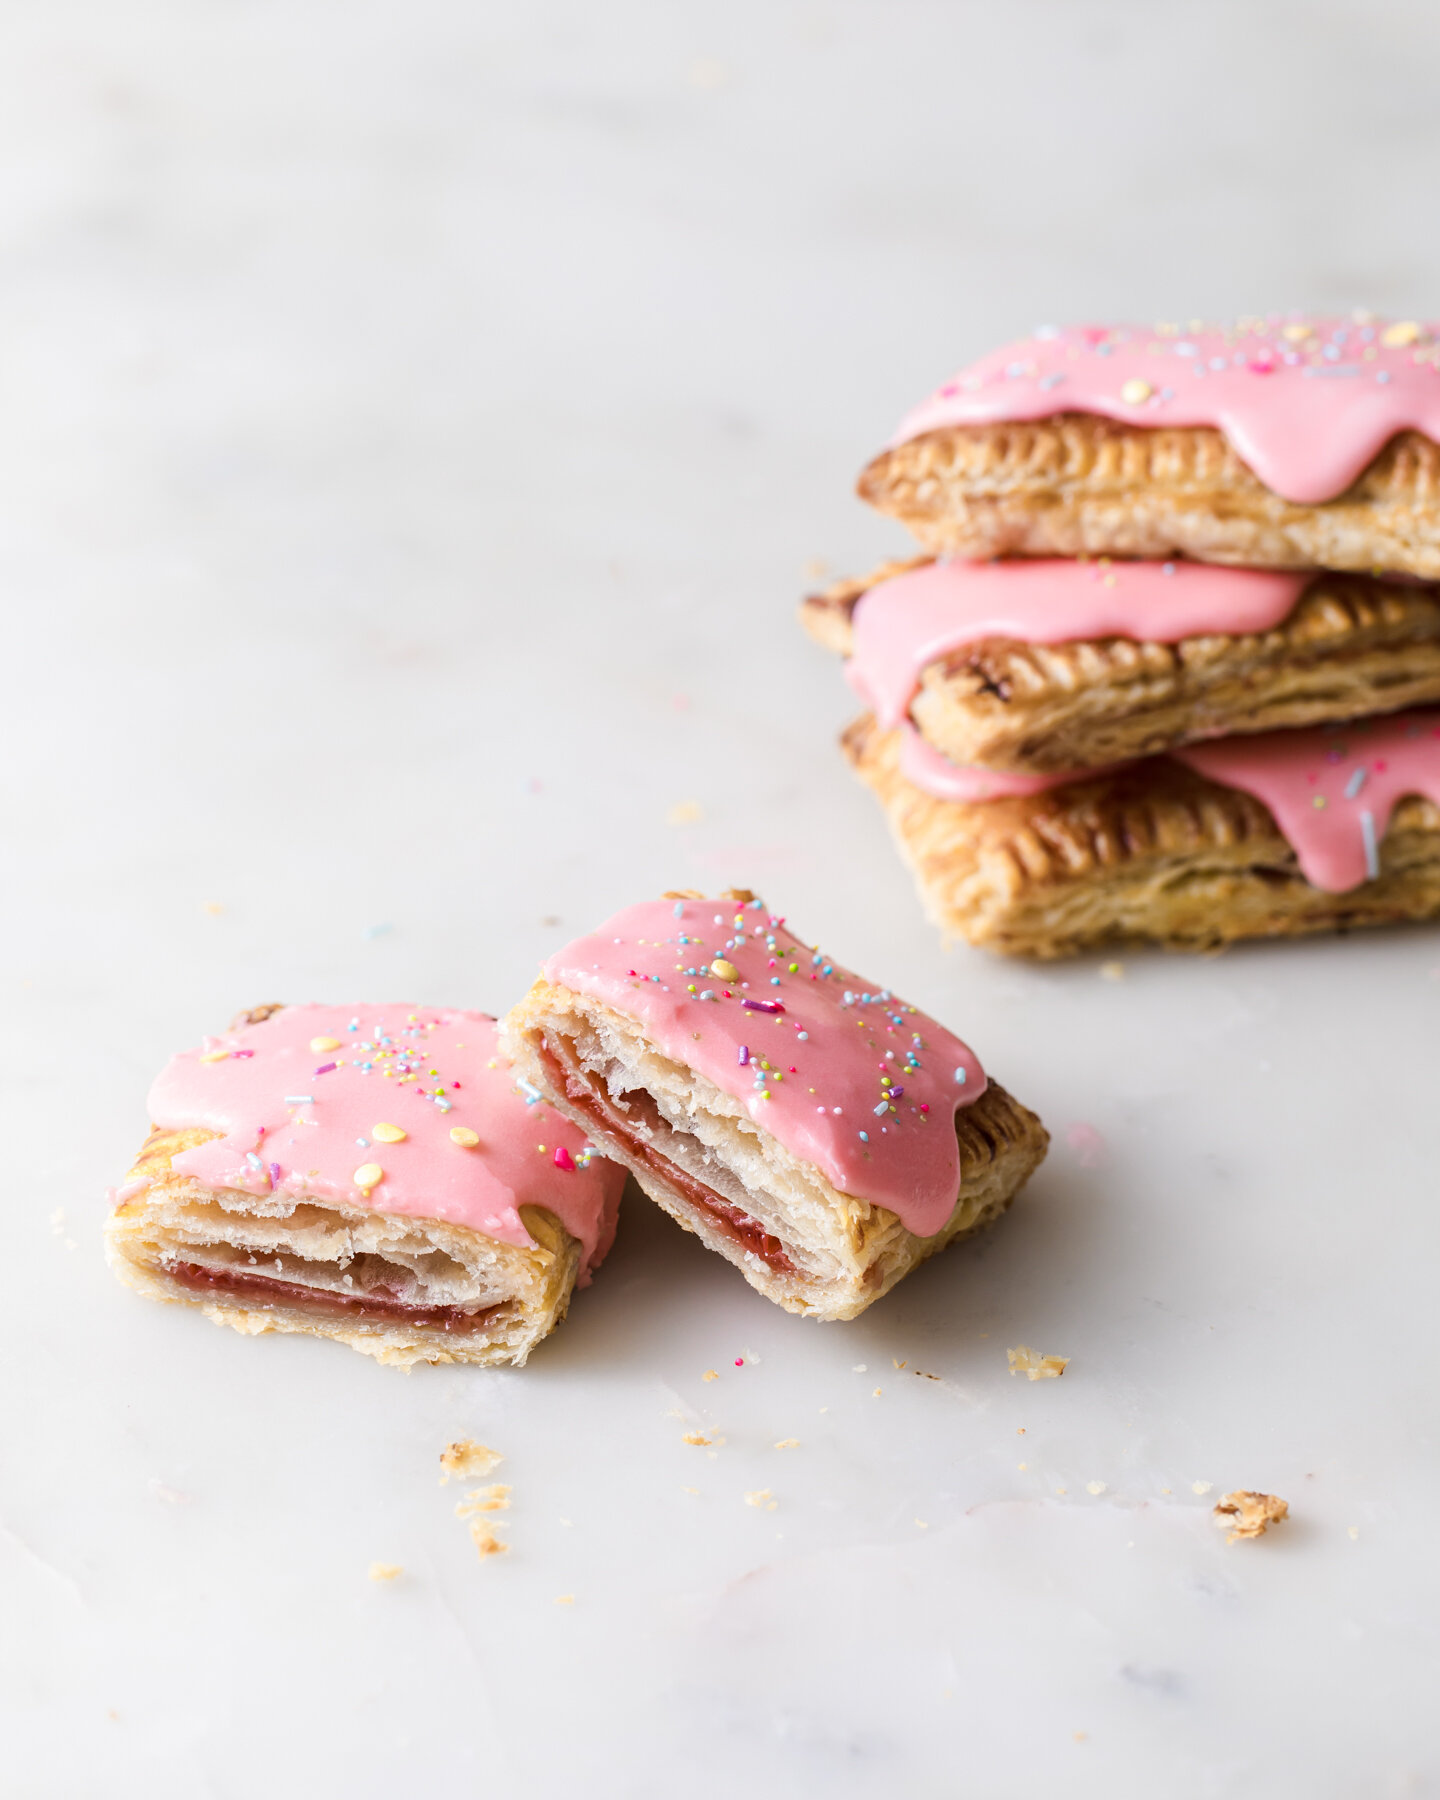 A stack of homemade strawberry pop tarts wtih flaky crust and jam center.